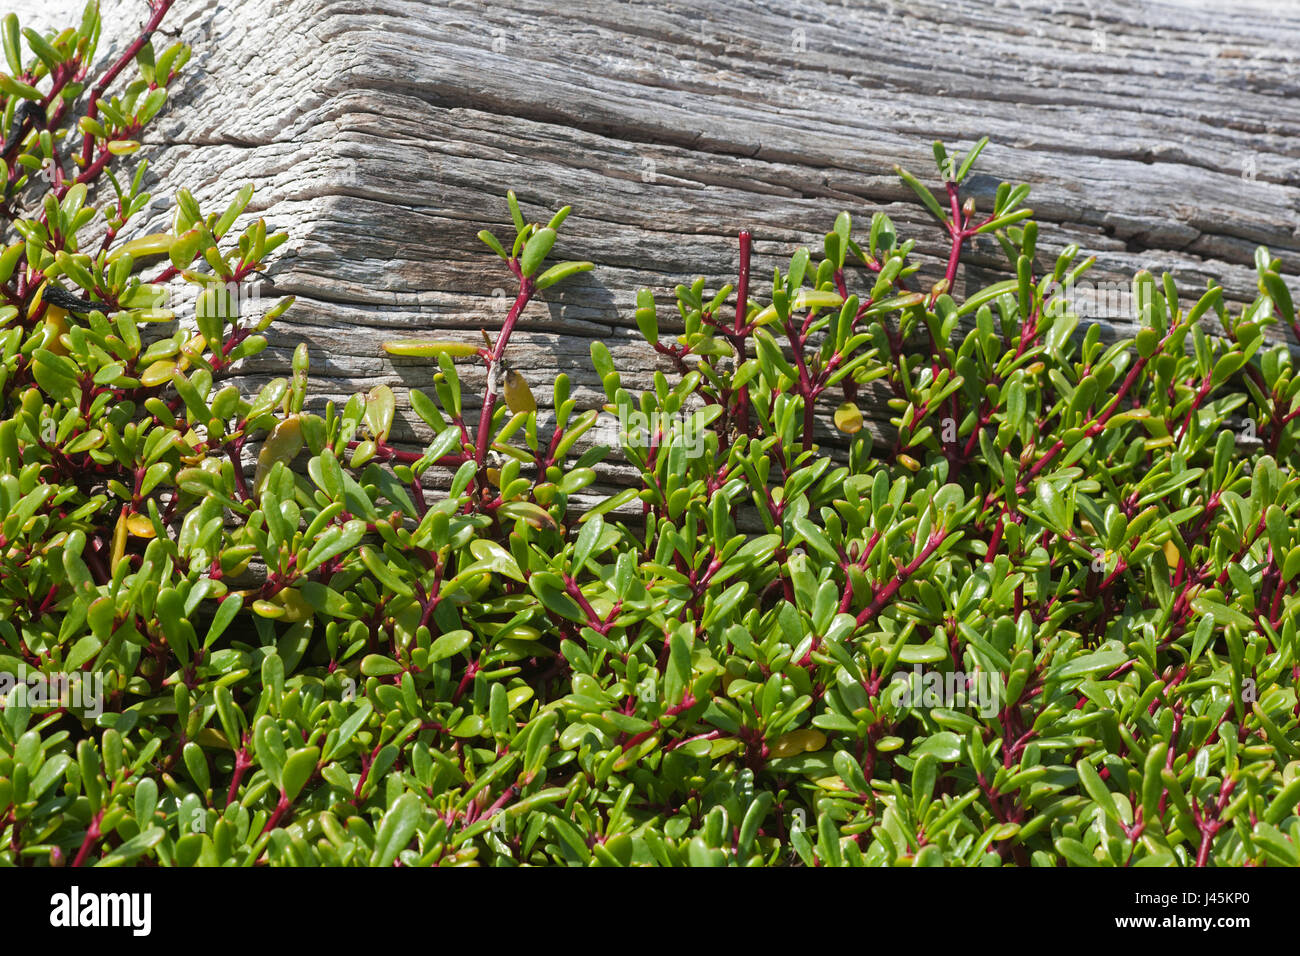 Shoreline purslane (Sesuvium portulacastrum) growing up the side of a driftwood log on a Pacific island Stock Photo